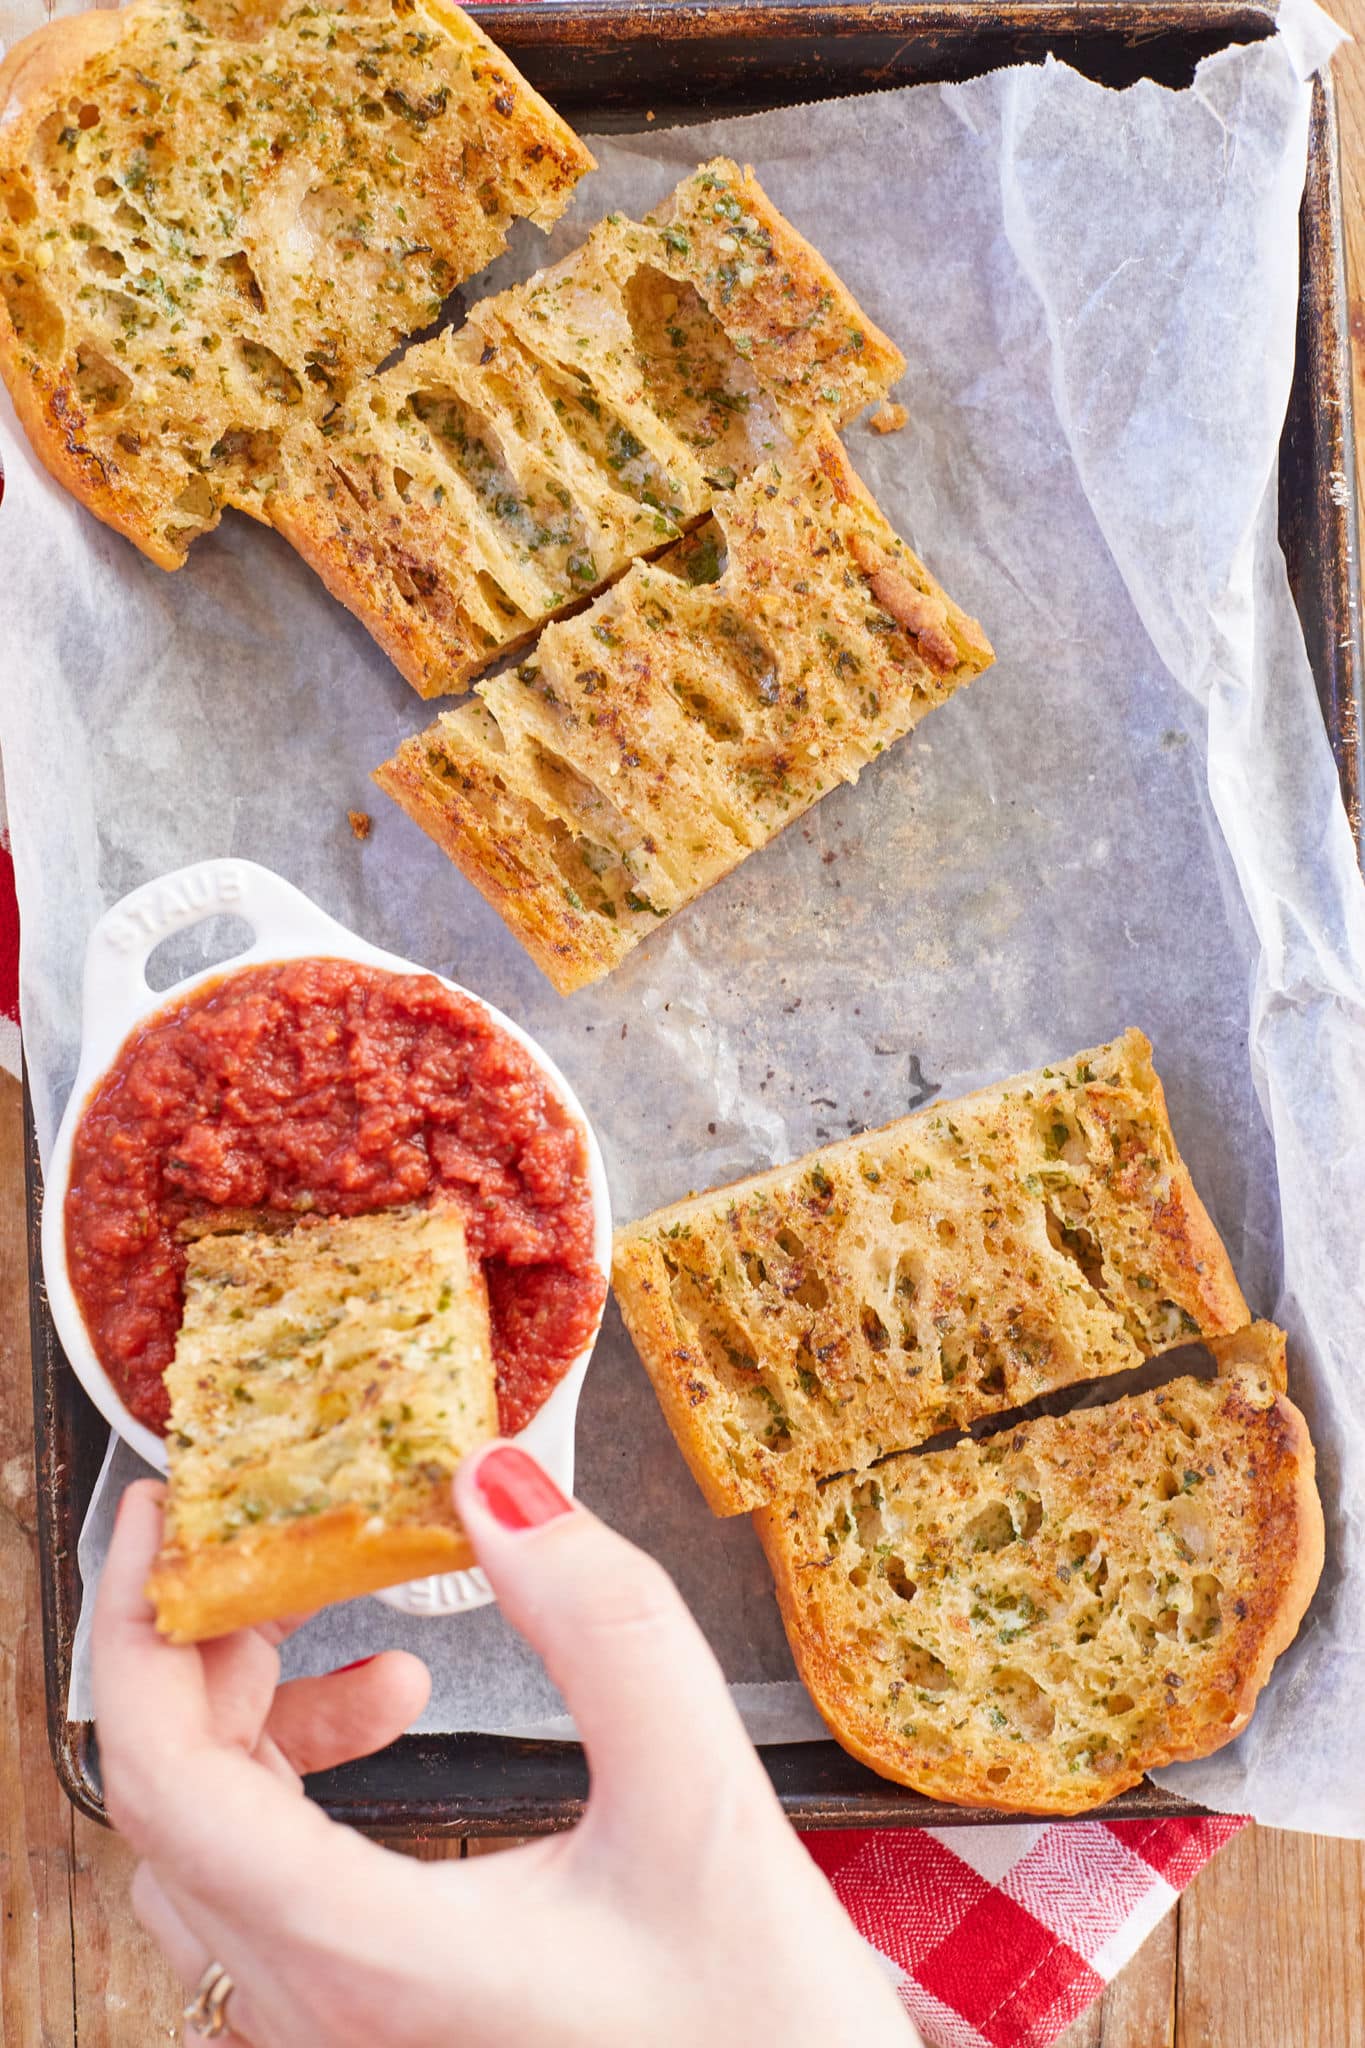 A piece of homemade garlic bread is dipped into homemade pizza sauce.